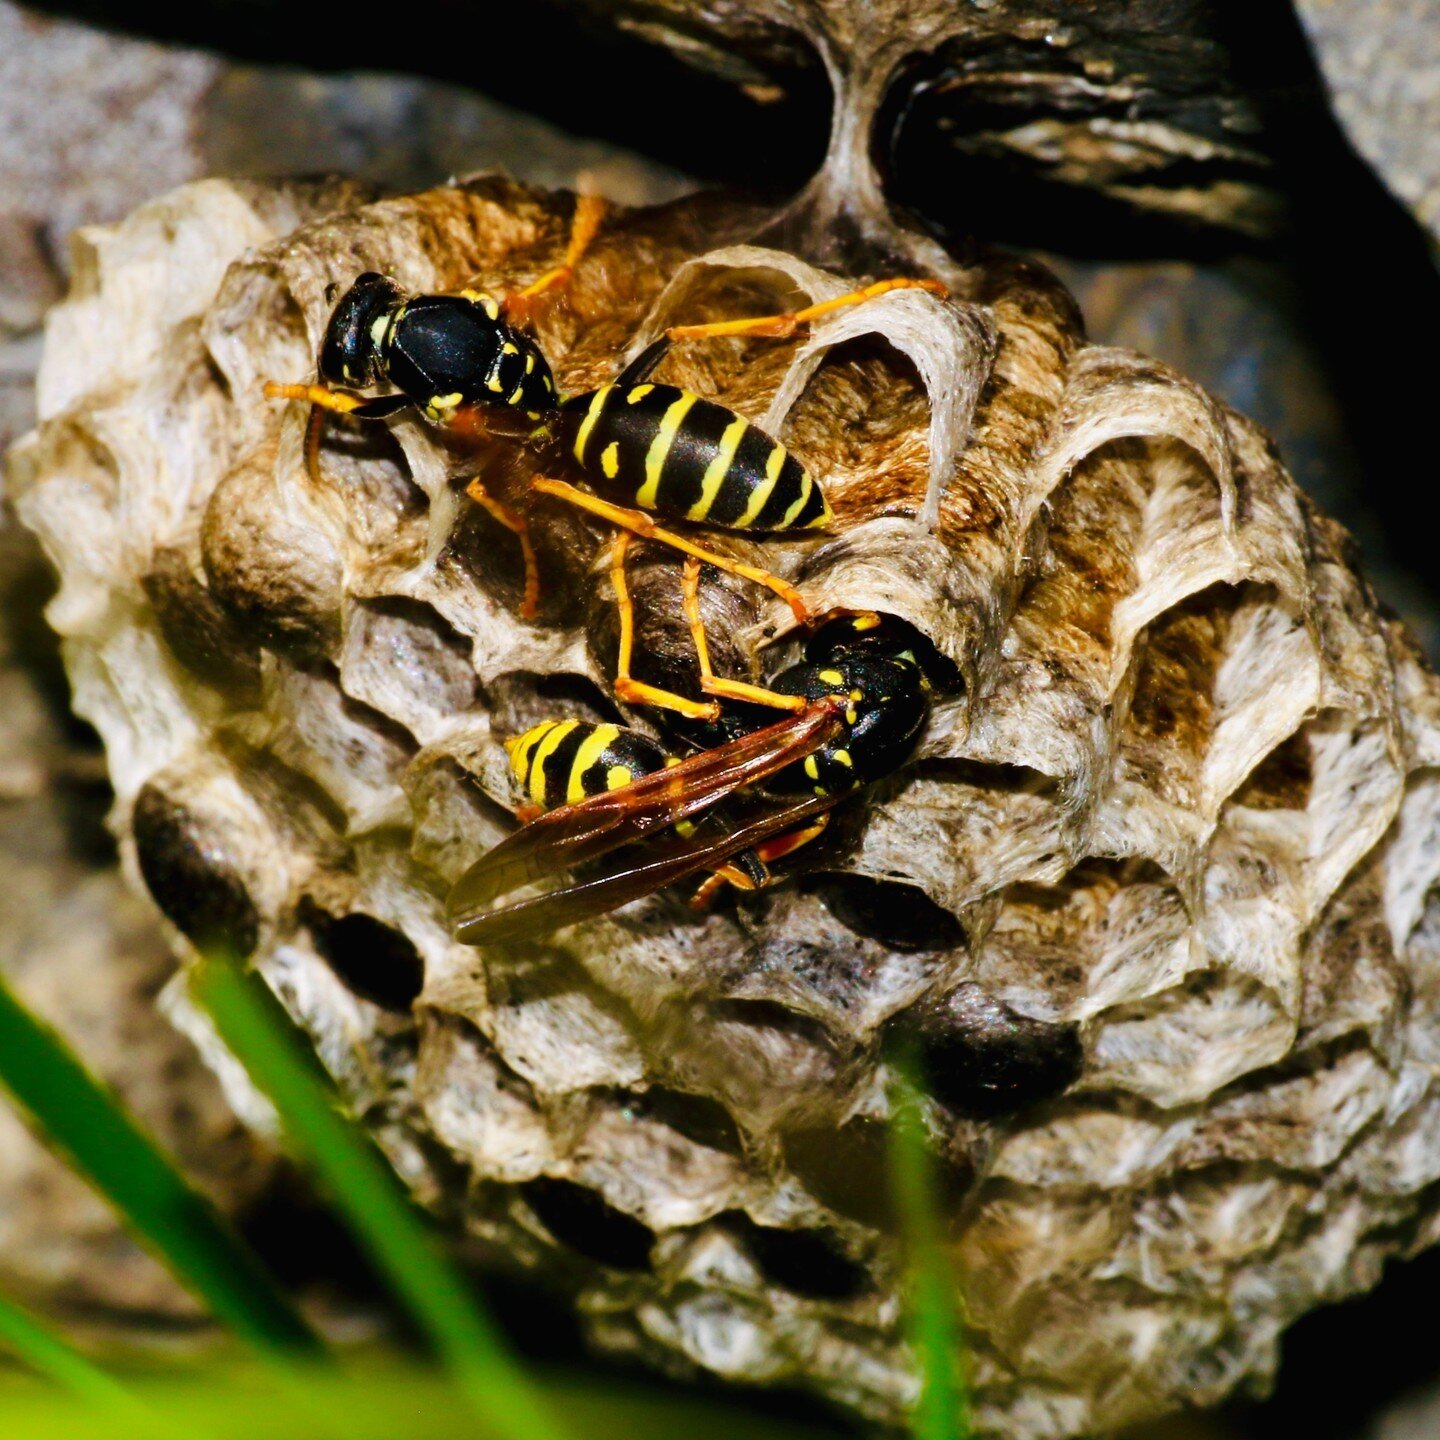 It's yellow jacket season! Did you know yellow jackets sting multiple times? Unlike other bees, these wasps don't have a barb on their stinger so that not only will they live long after they've stung you, they can sting you several times!